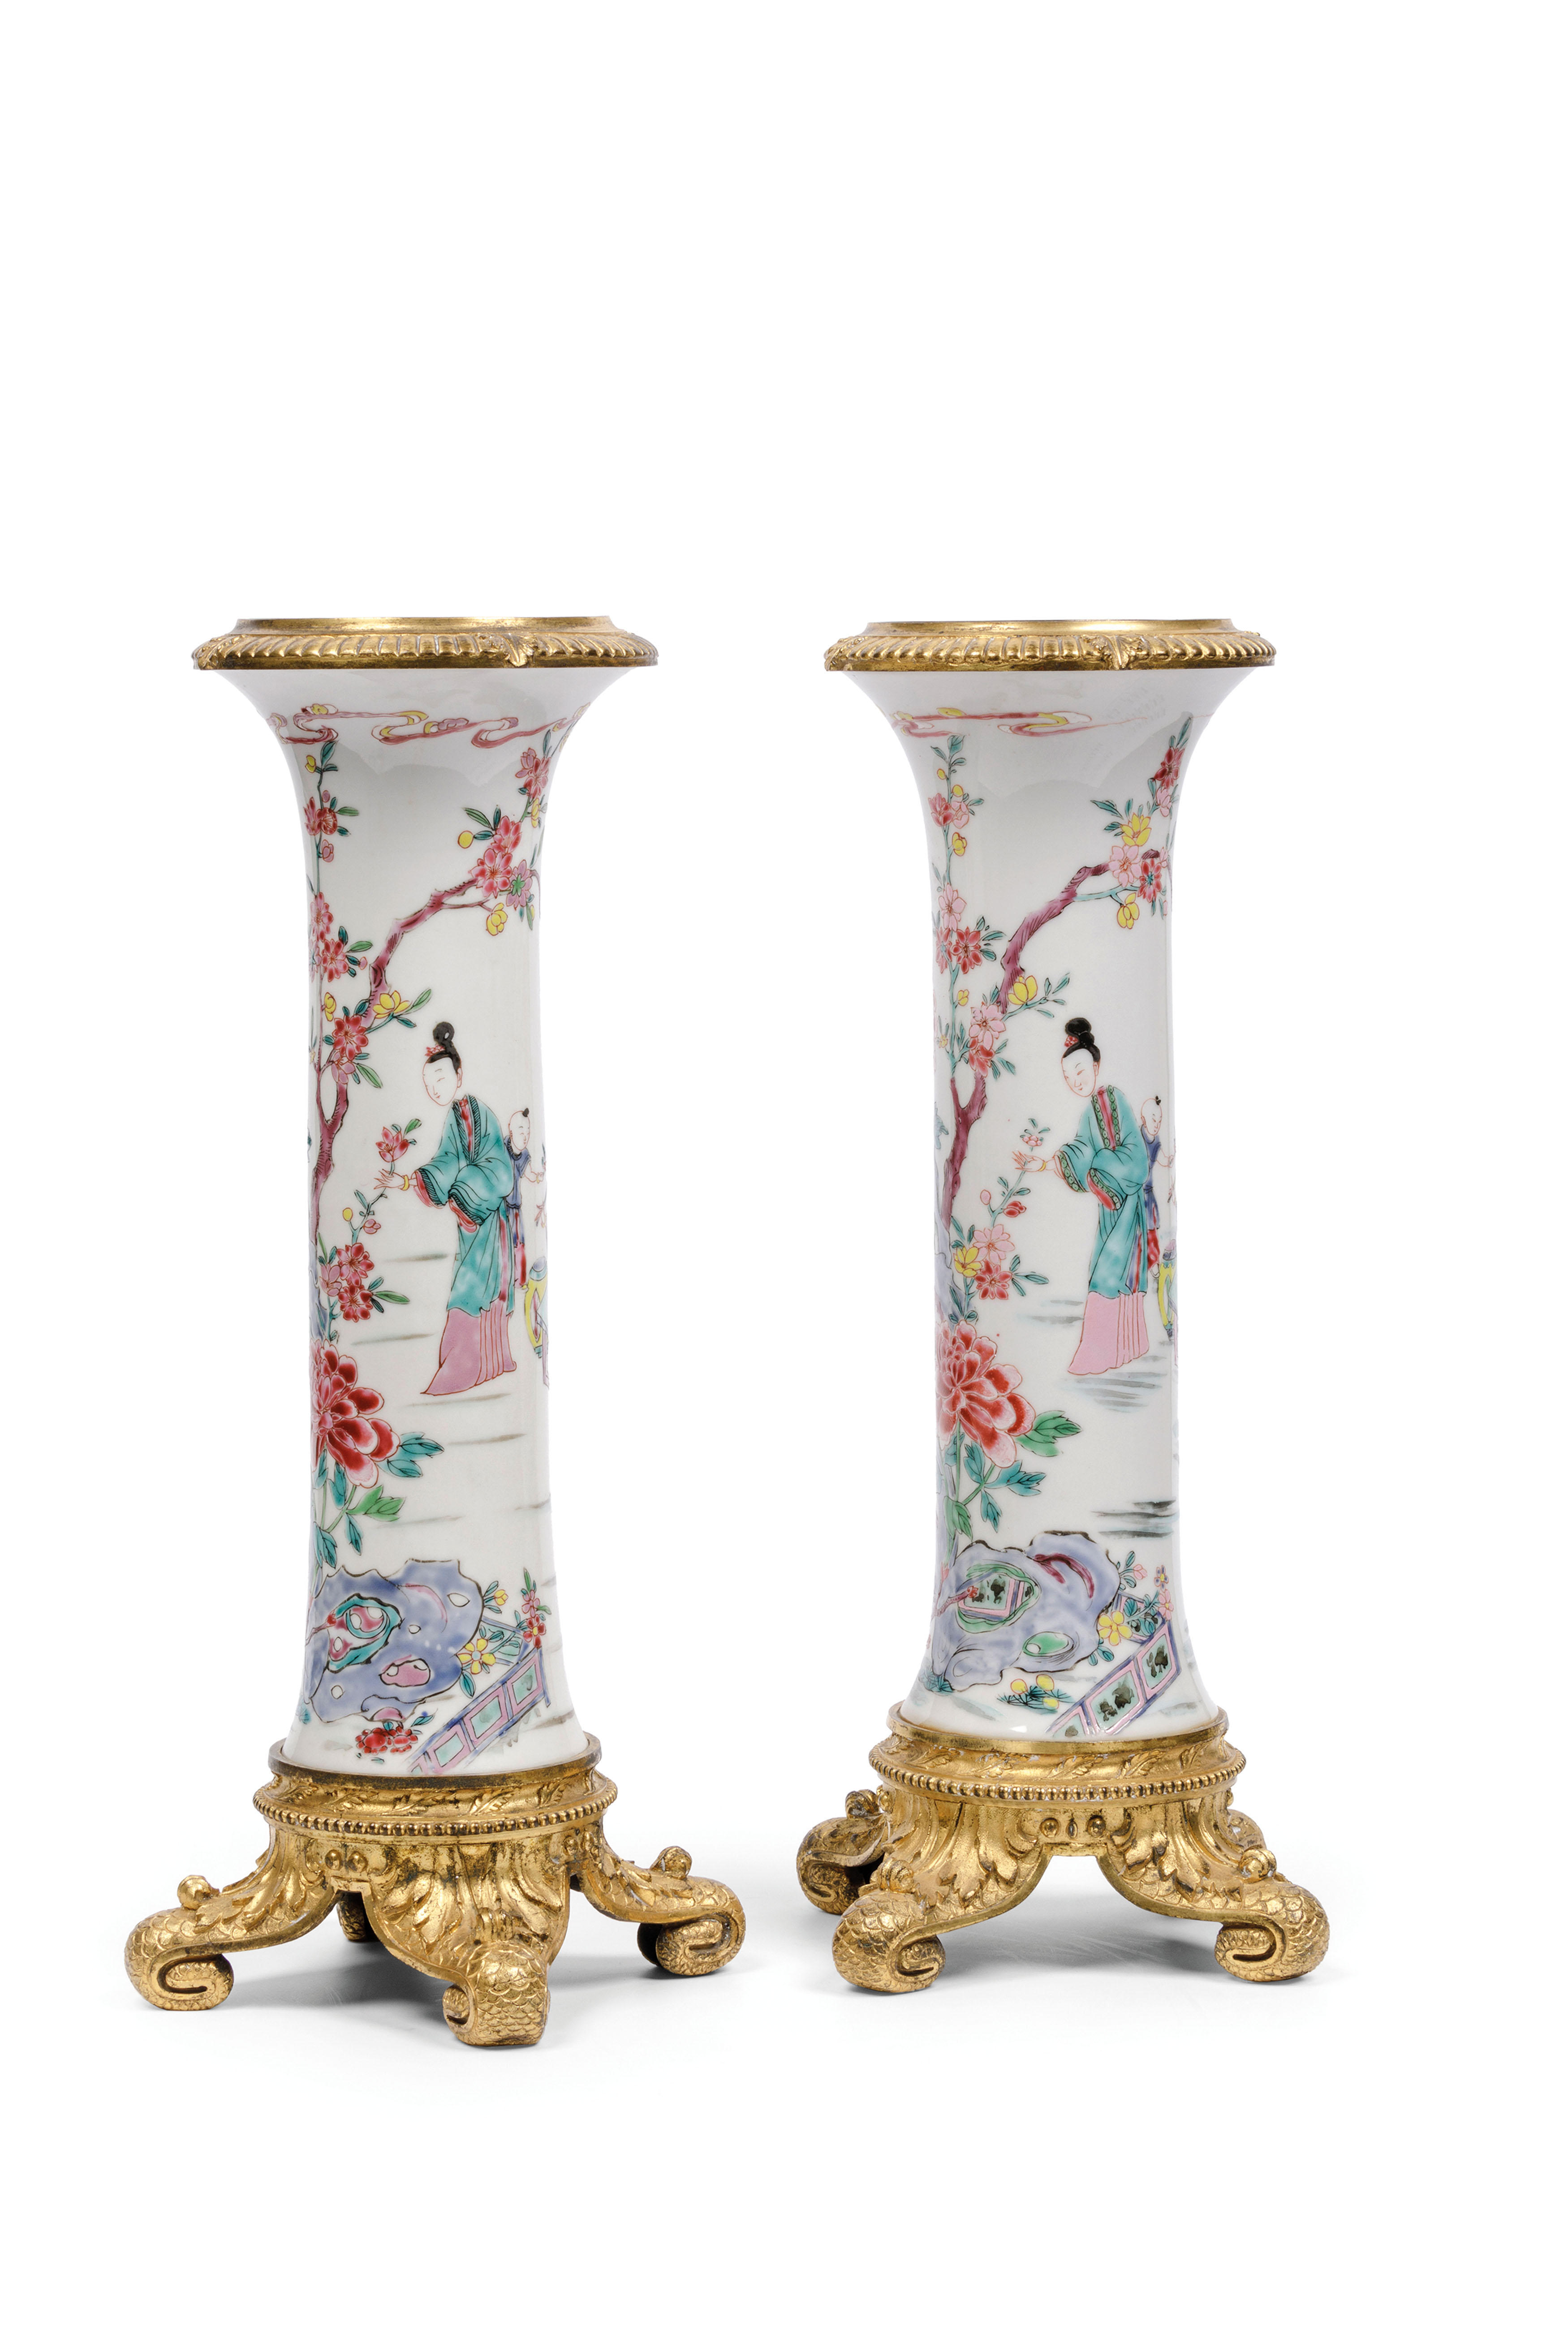 A PAIR OF FAMILLE ROSE PORCELAIN TRUMPET VASES, CHINA, 18TH CENTURY, WITH EUROPEAN BRONZE MOUNT - Image 2 of 4